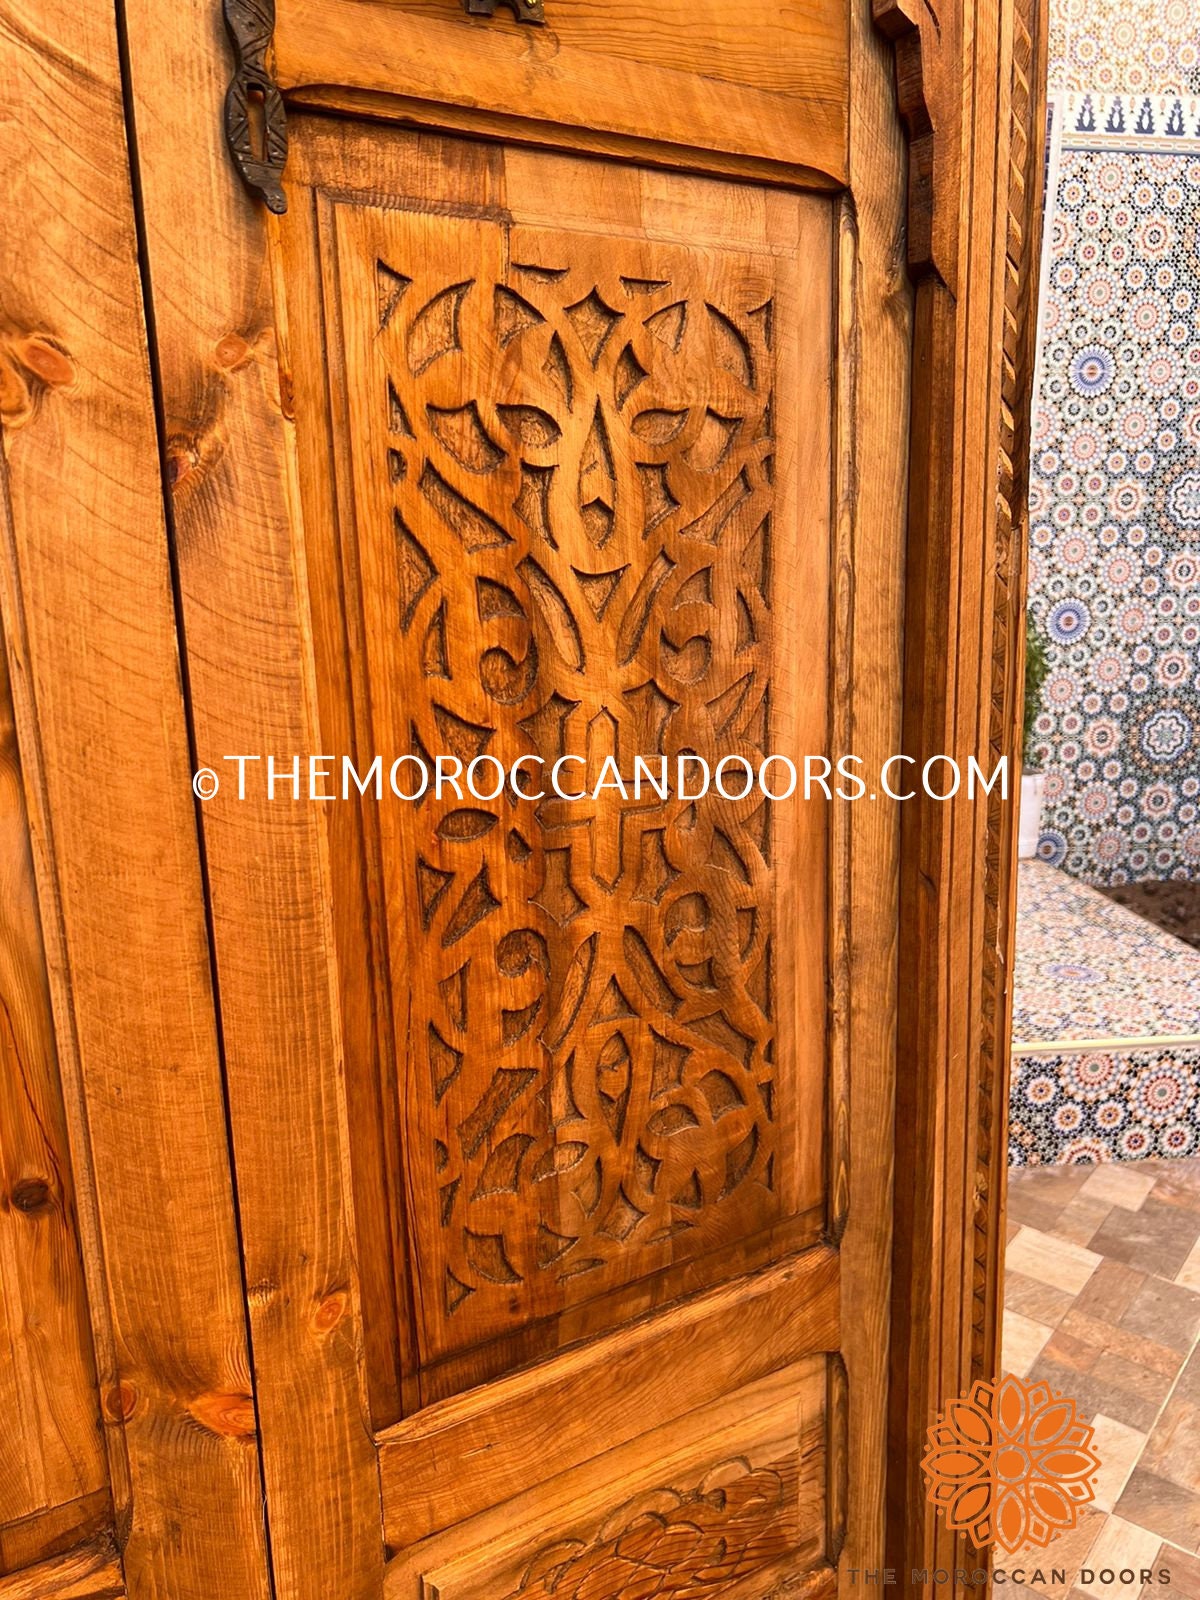 Traditional Geometric Carved Large Moroccan Double Panel Wooden Indoor Outdoor Moroccan Wooden Door With Iron Window Fer forgé Architectural